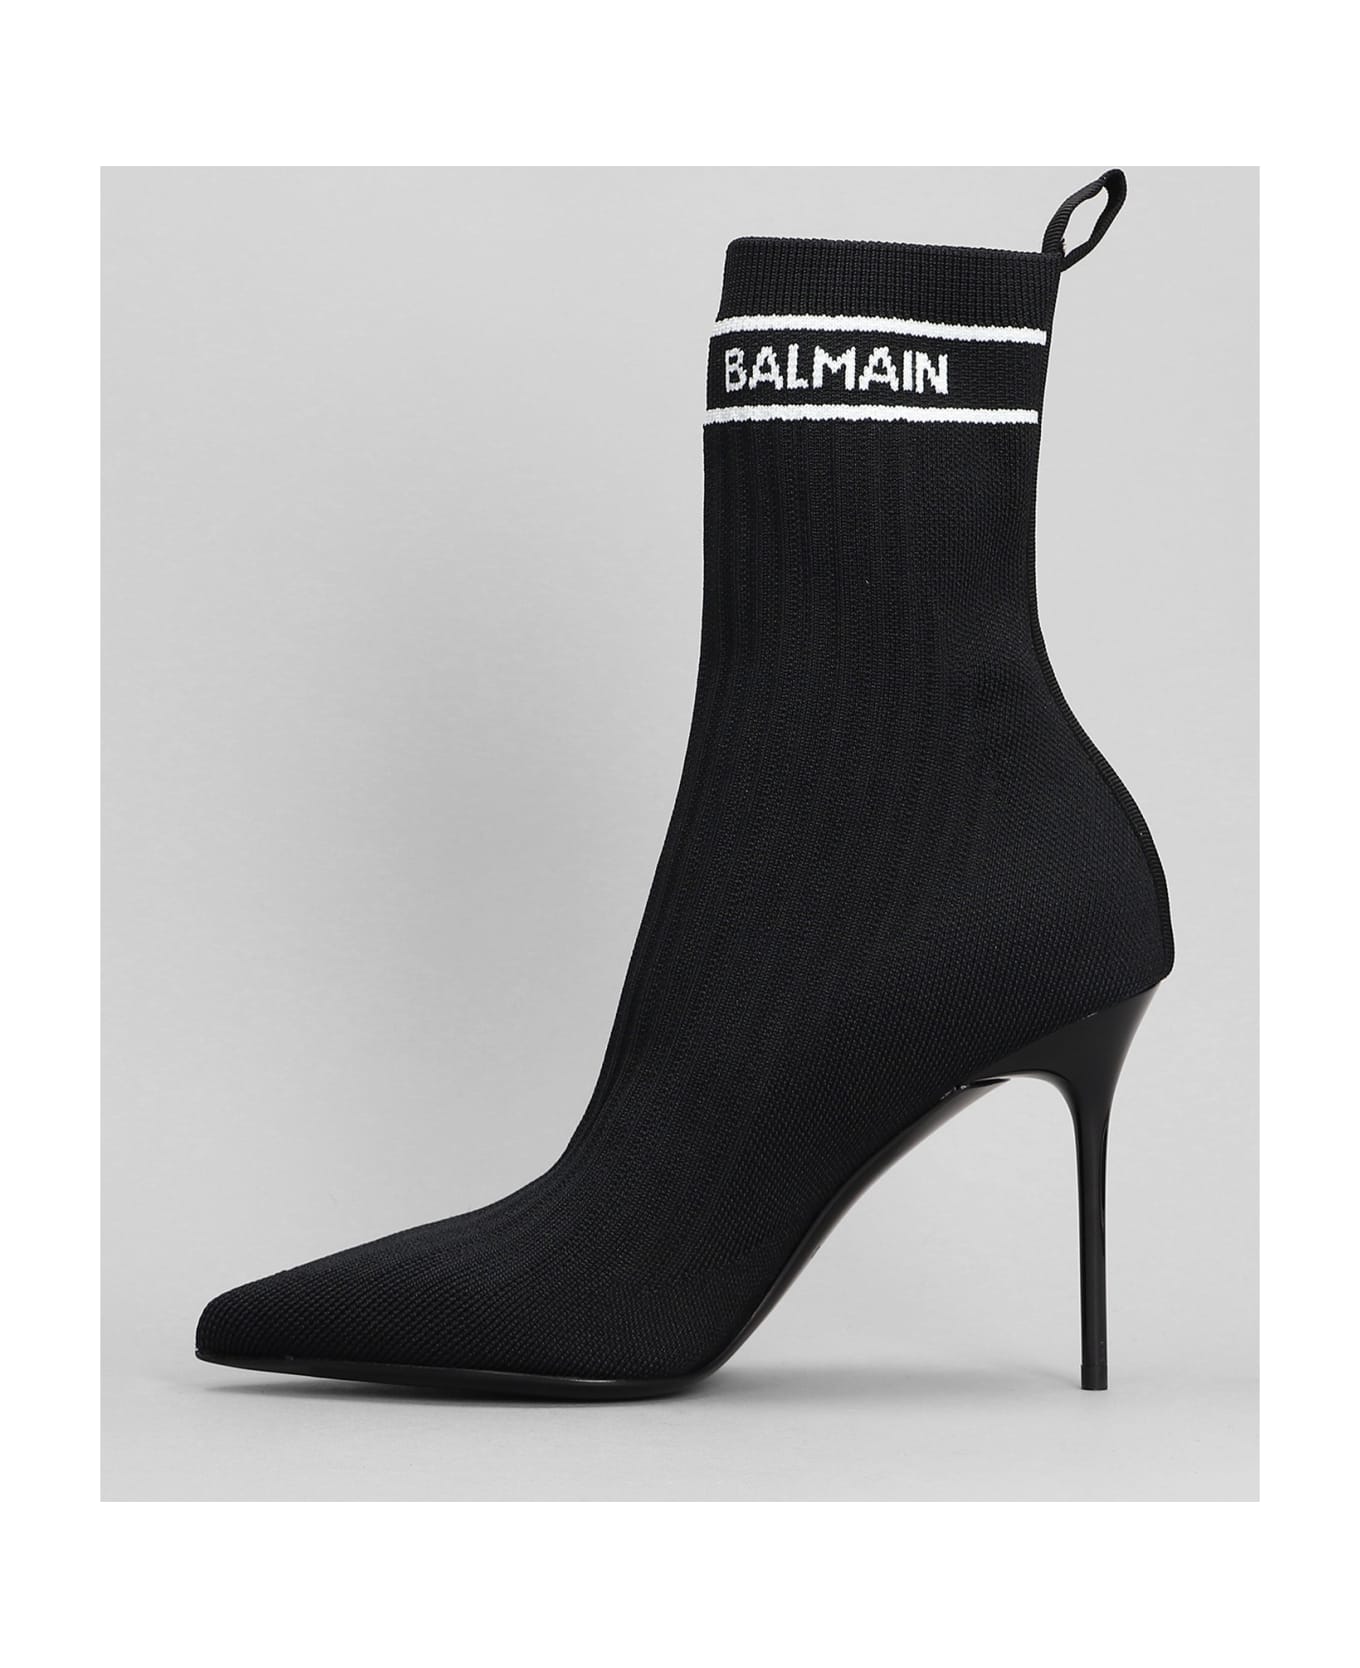 Balmain High Heels Ankle Boots In Black Polyester - black ブーツ